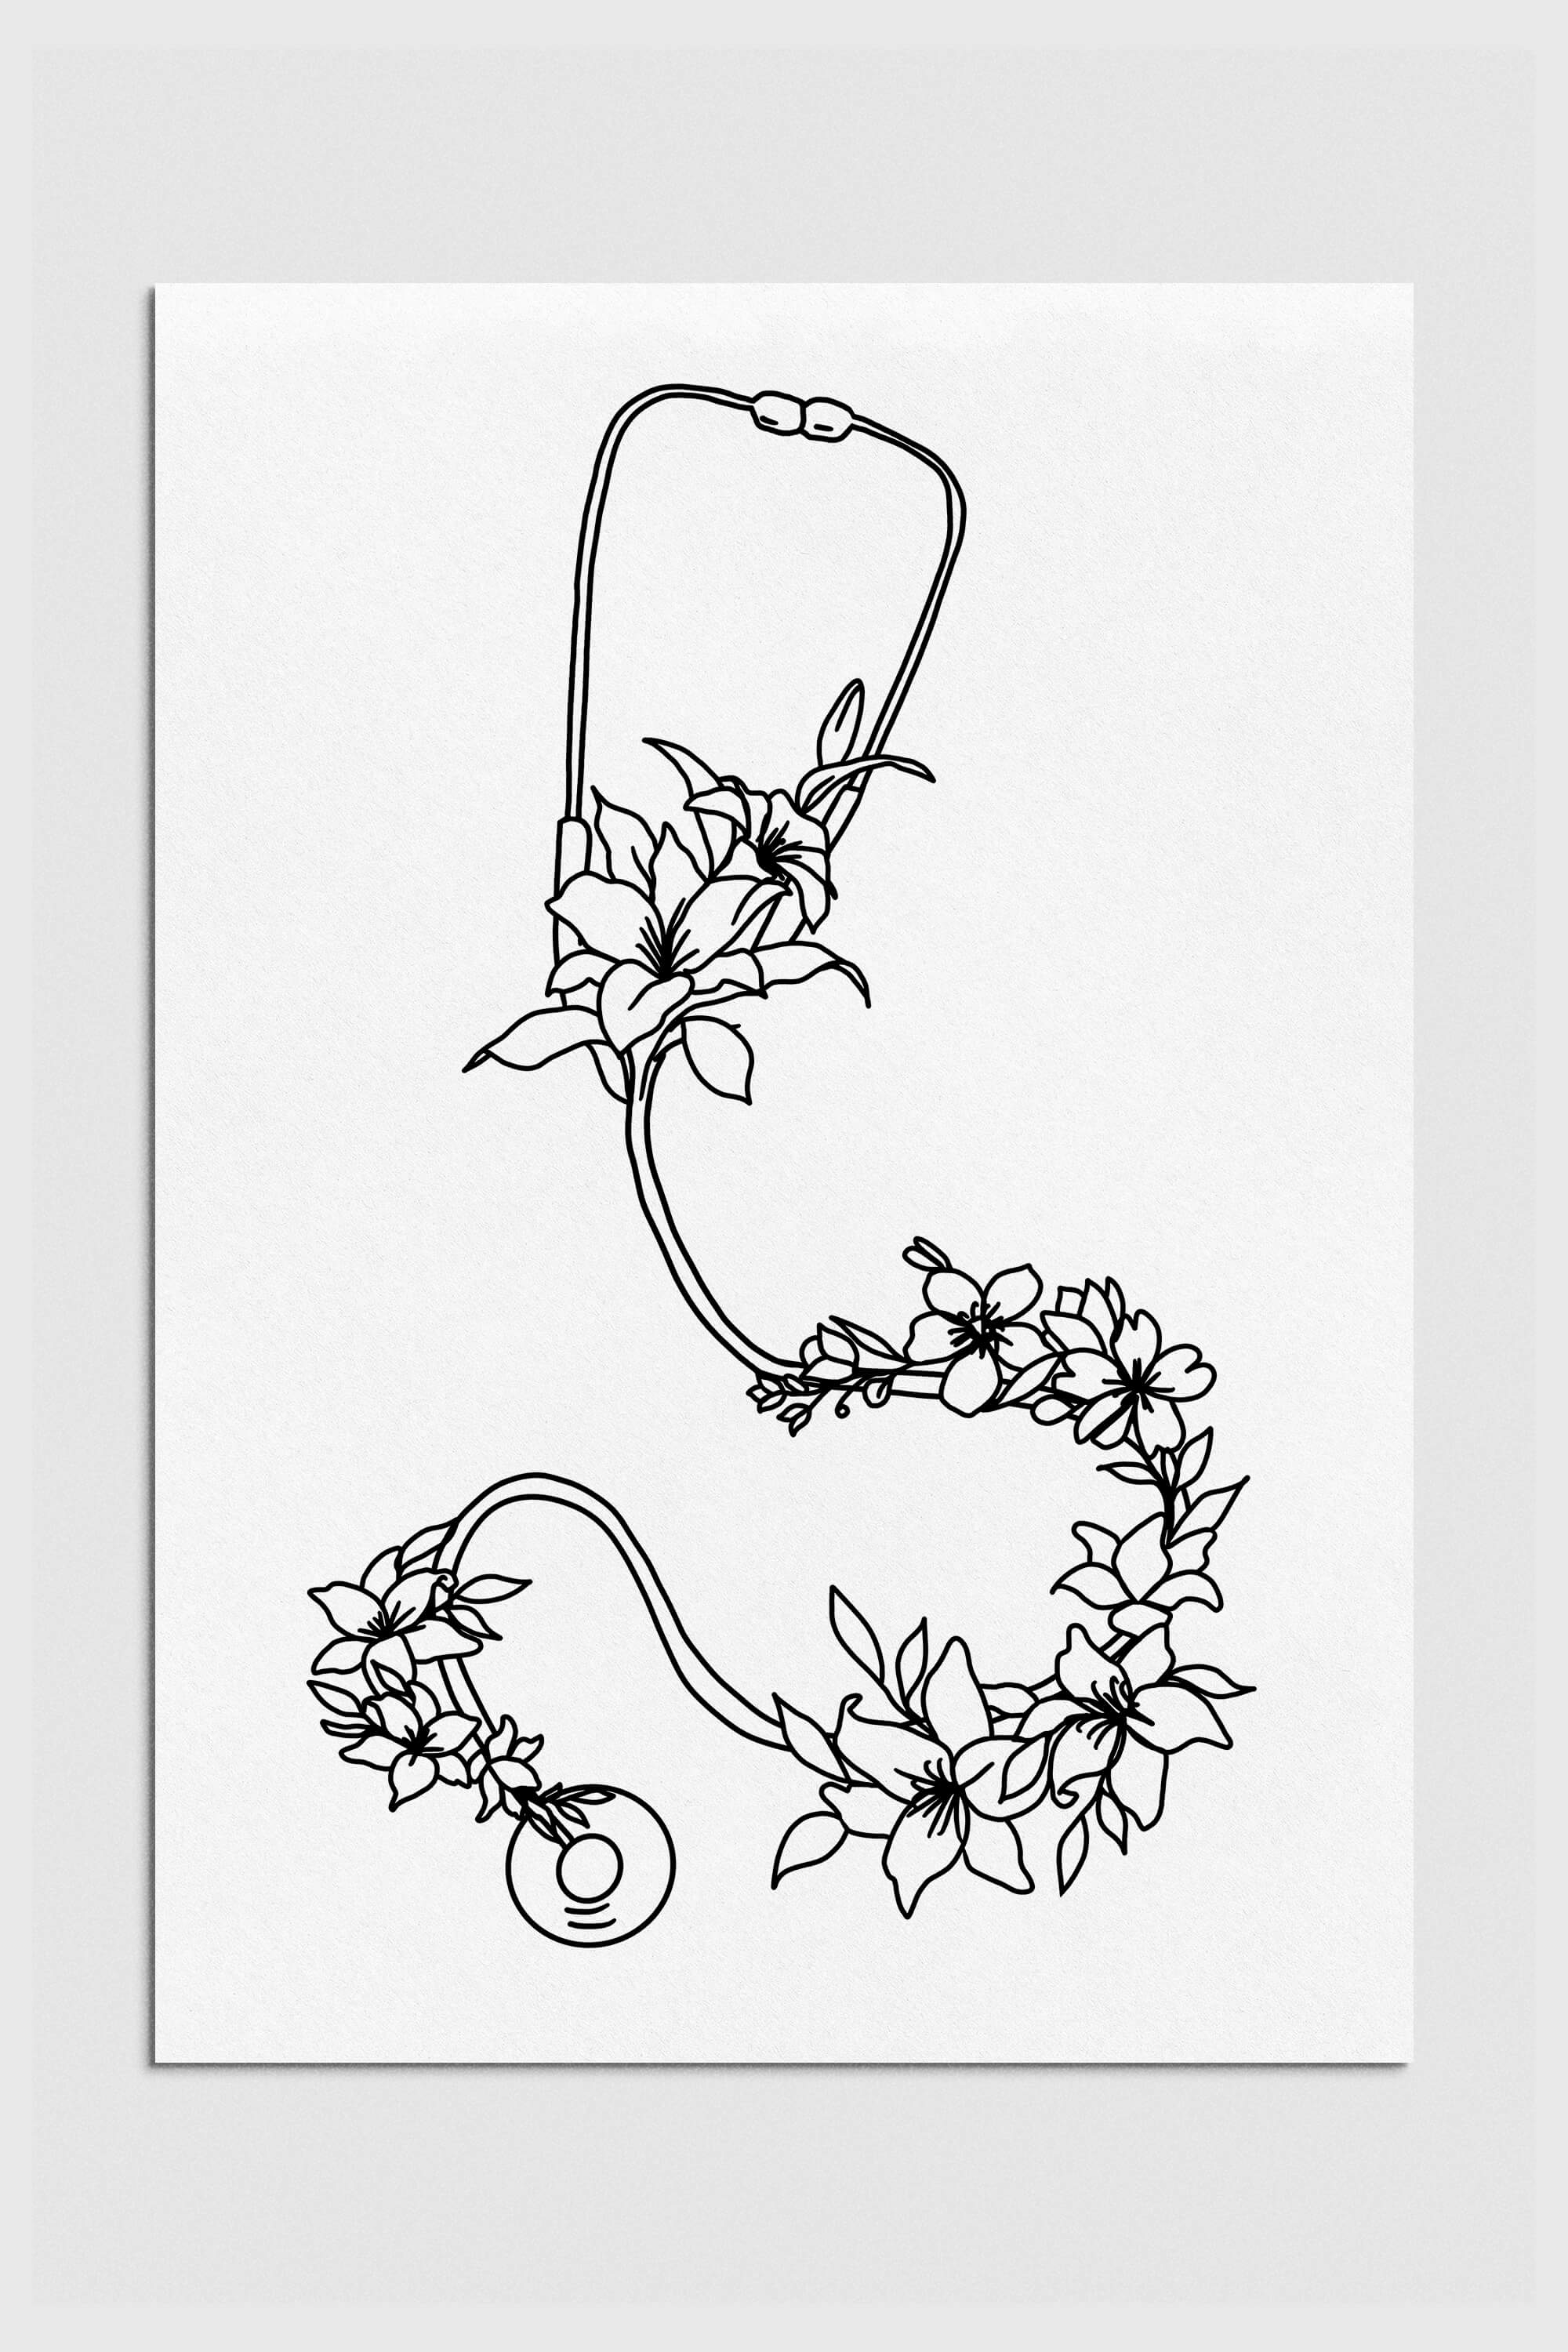 Elegant black and white illustration featuring a floral stethoscope, blending nature and medical themes for a unique cardiologist gift.